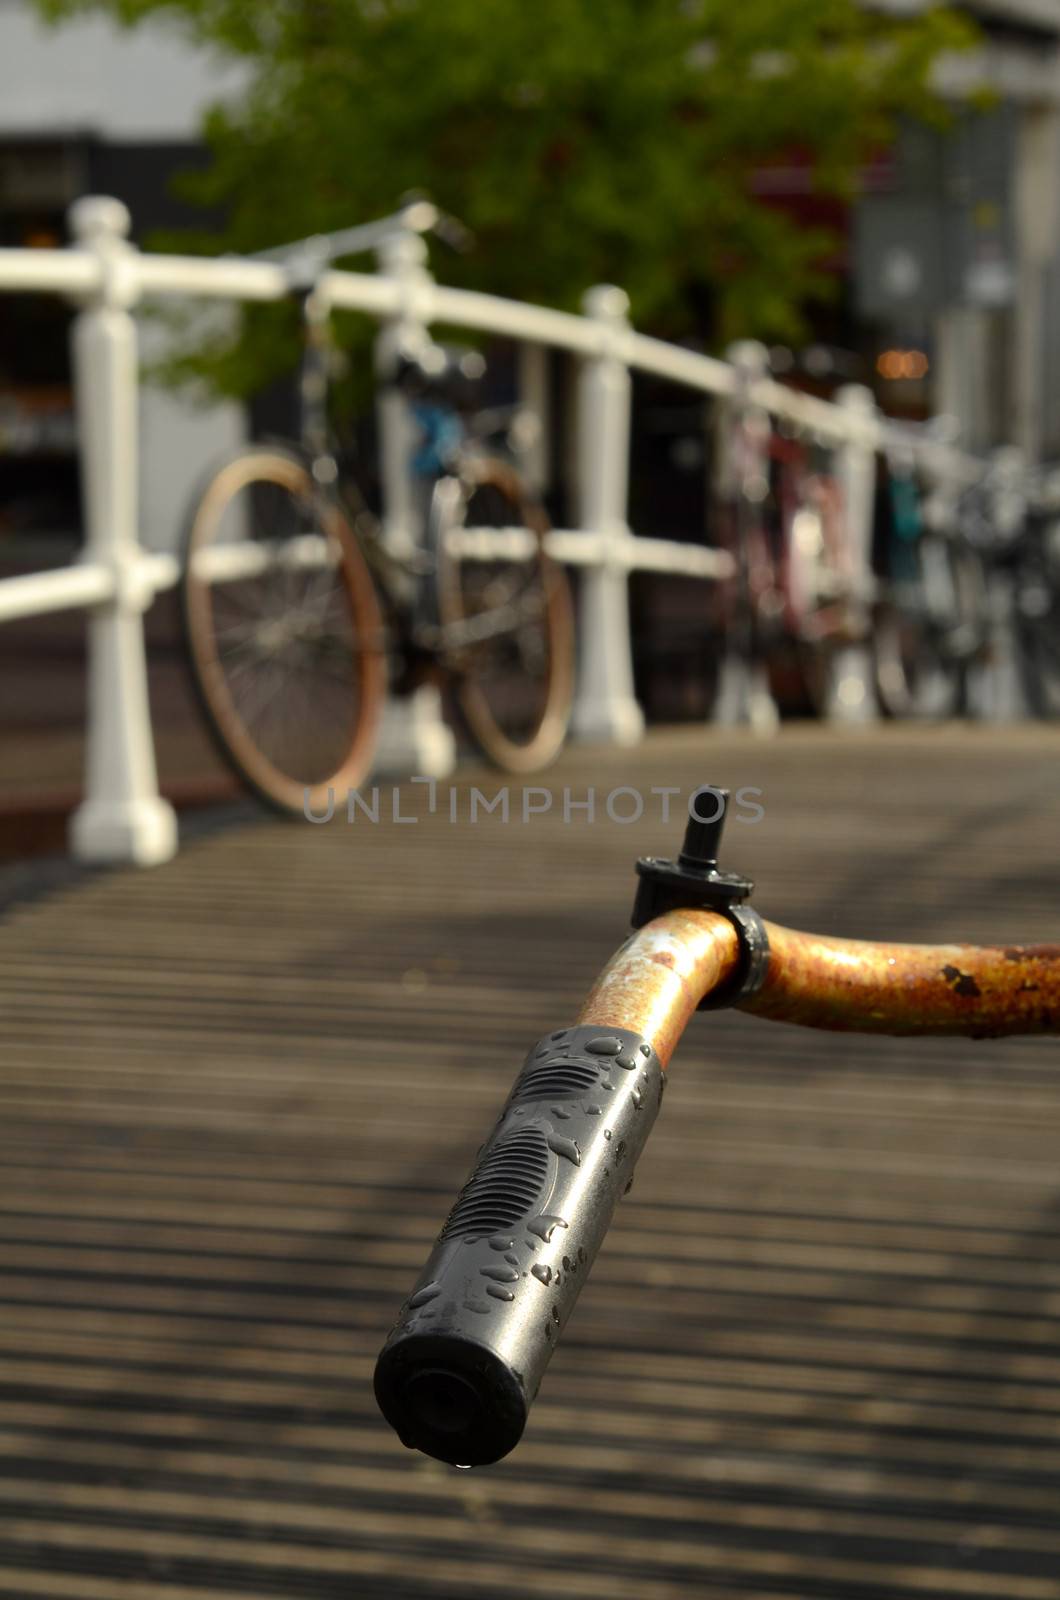 Handlebar Of An Old Bike On A Bridge Over A Canal In The Netherlands